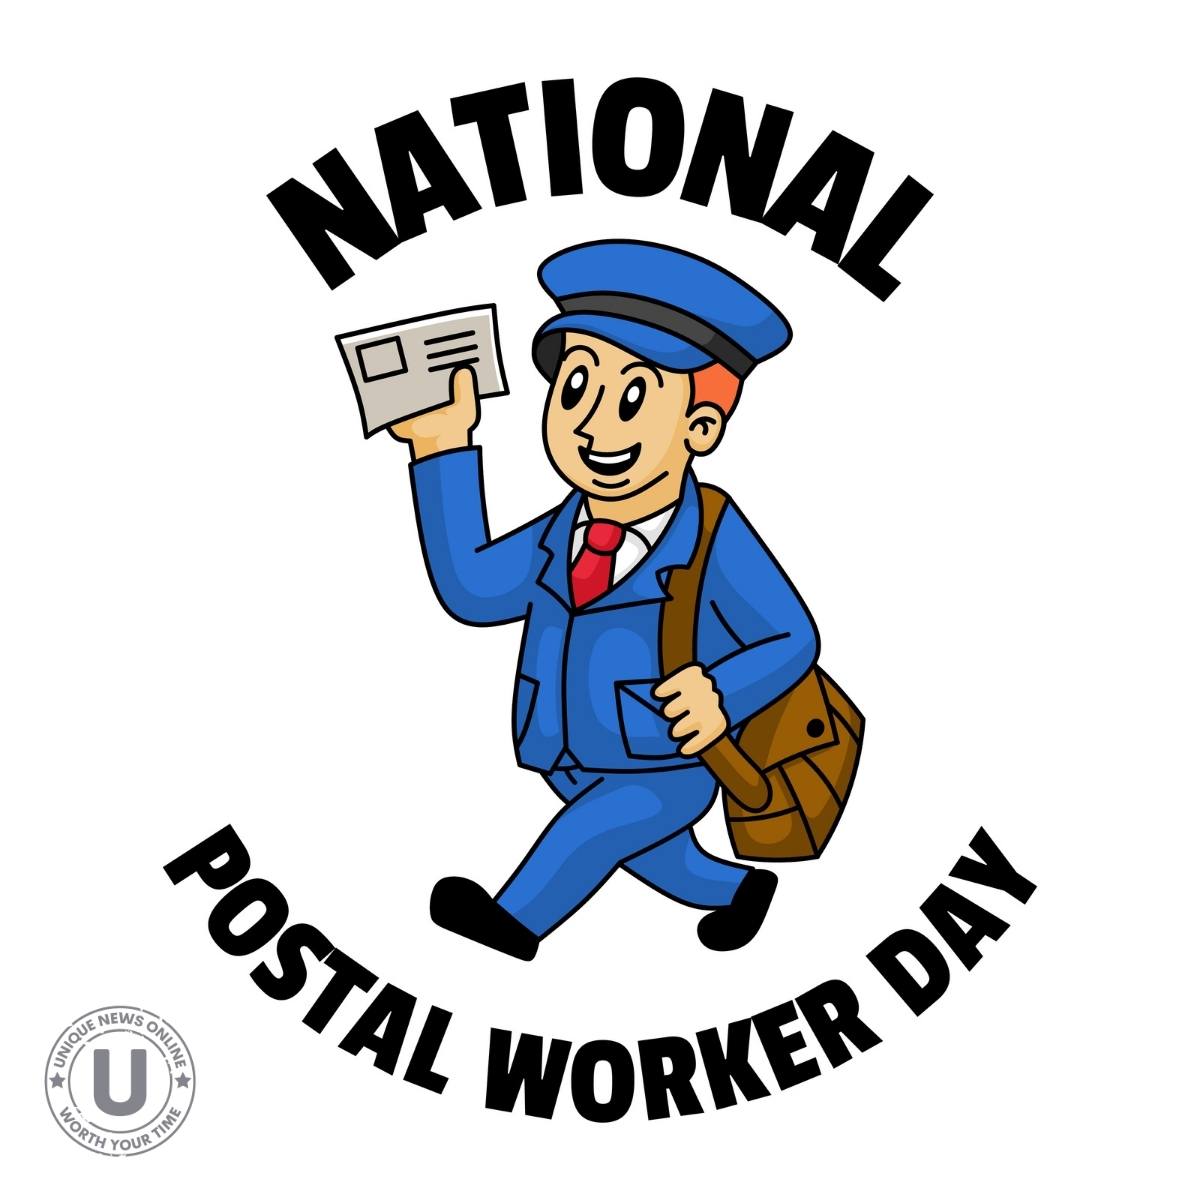 National Postal Worker Day 2022 Quotes, Images, Messages, Posters